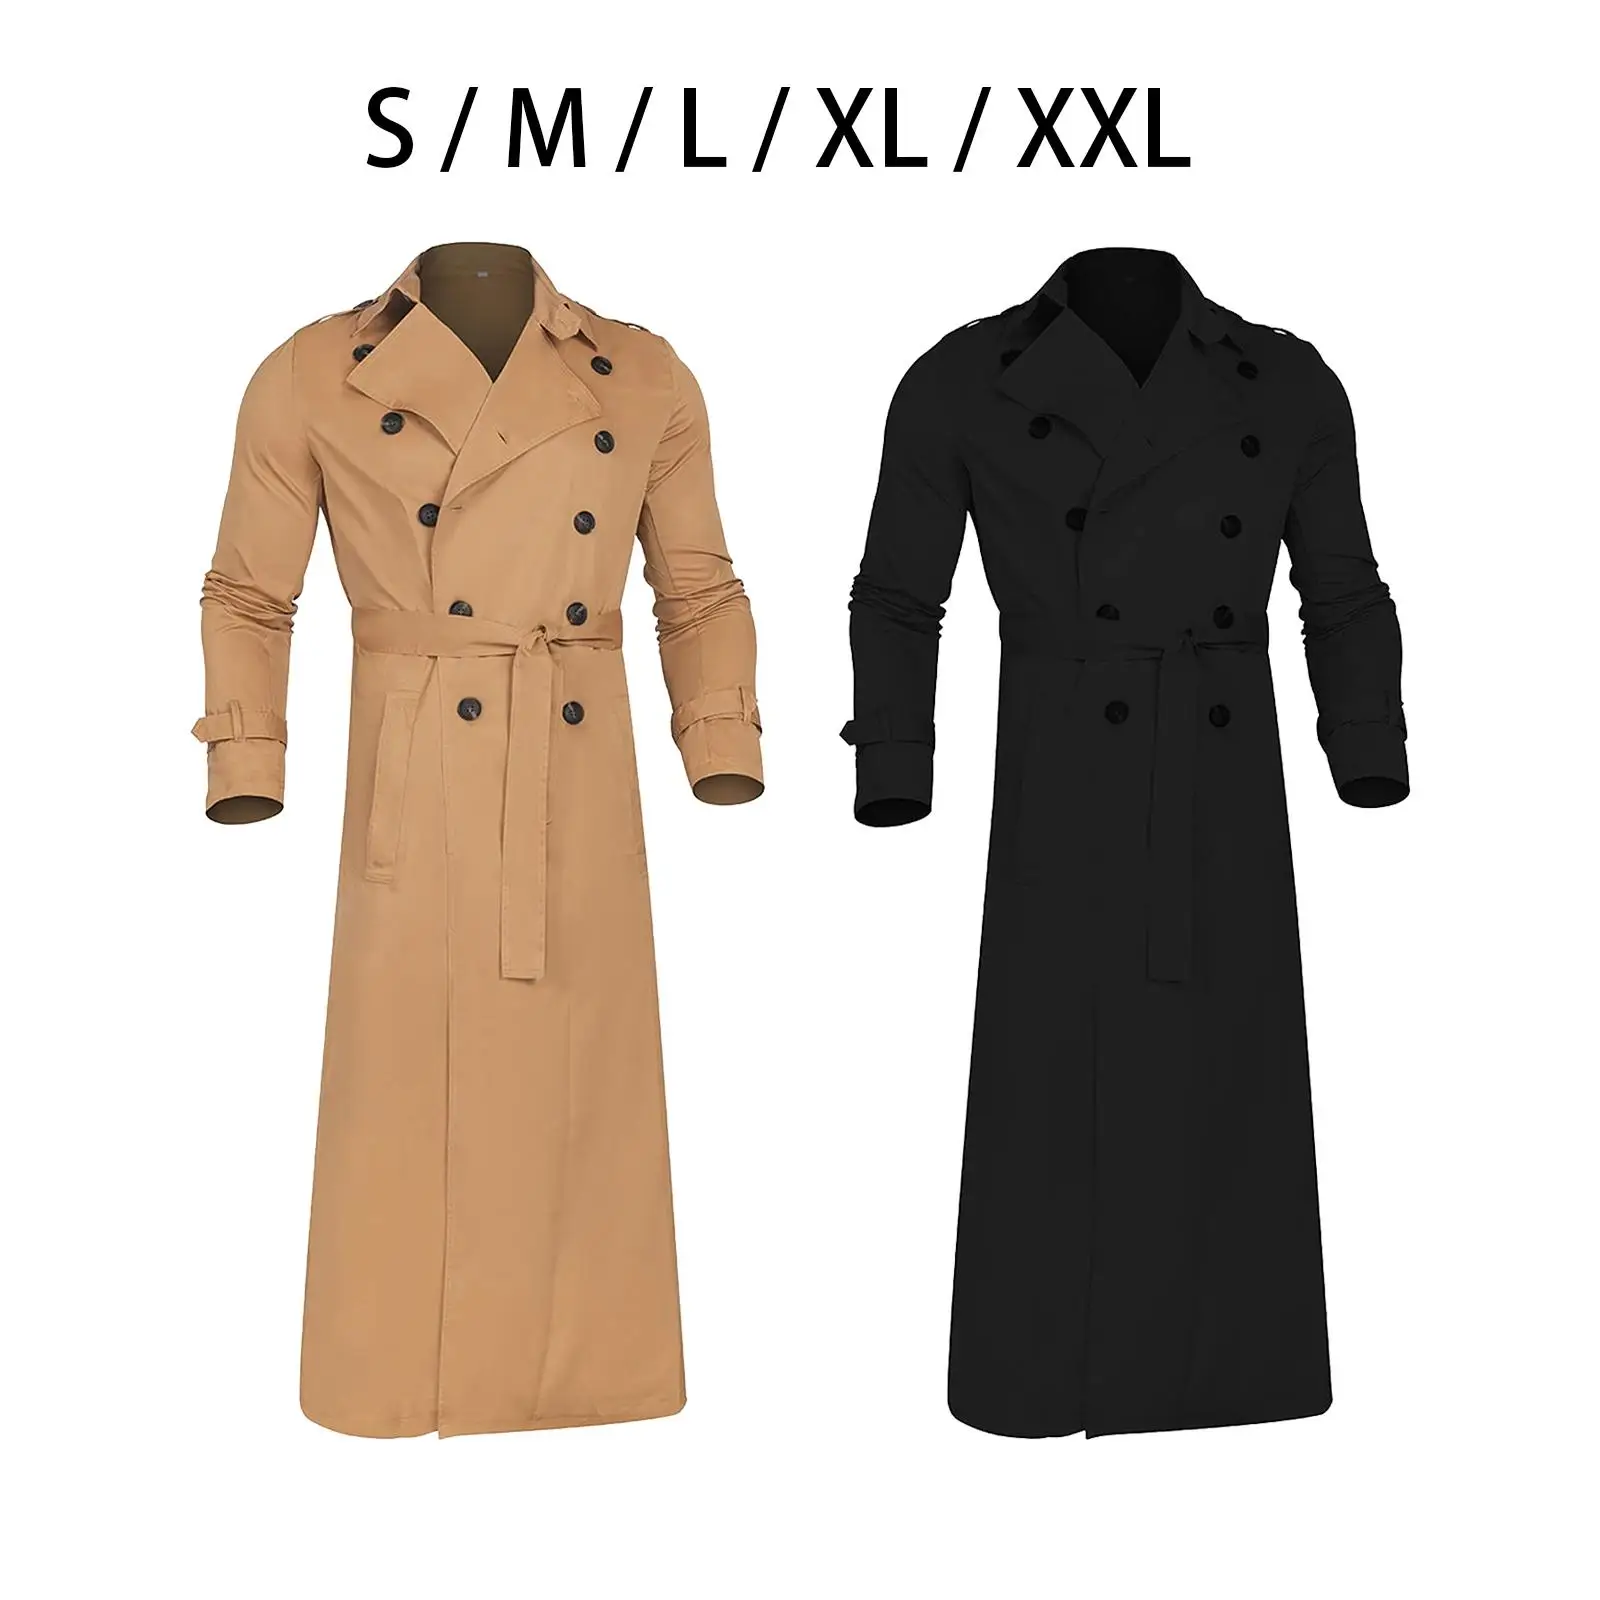 Belted Men`trench Coat Long Jacket Overcoat Peacoat Warm Fashion full Length Male Casual Windbreaker for Spring Autumn dating